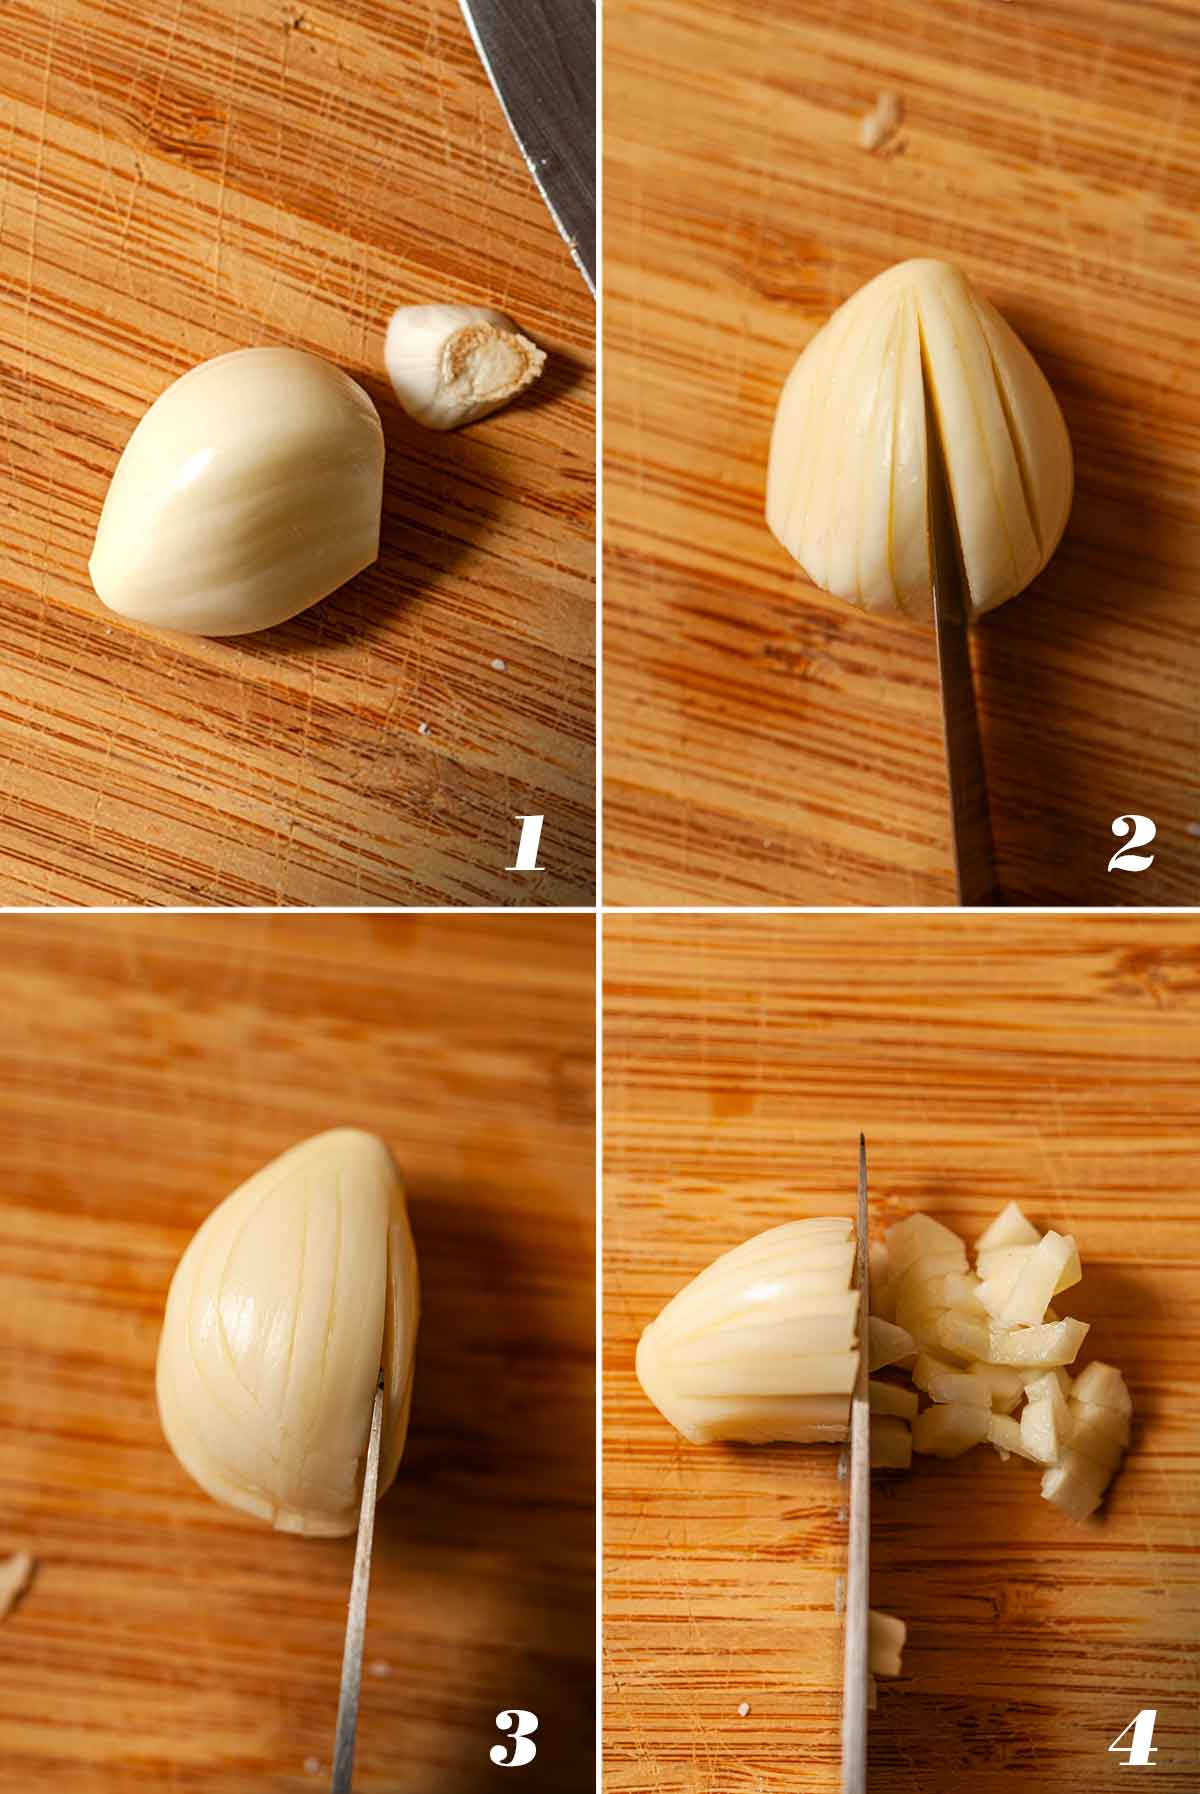 A collage of 4 numbered images showing how to mince garlic.